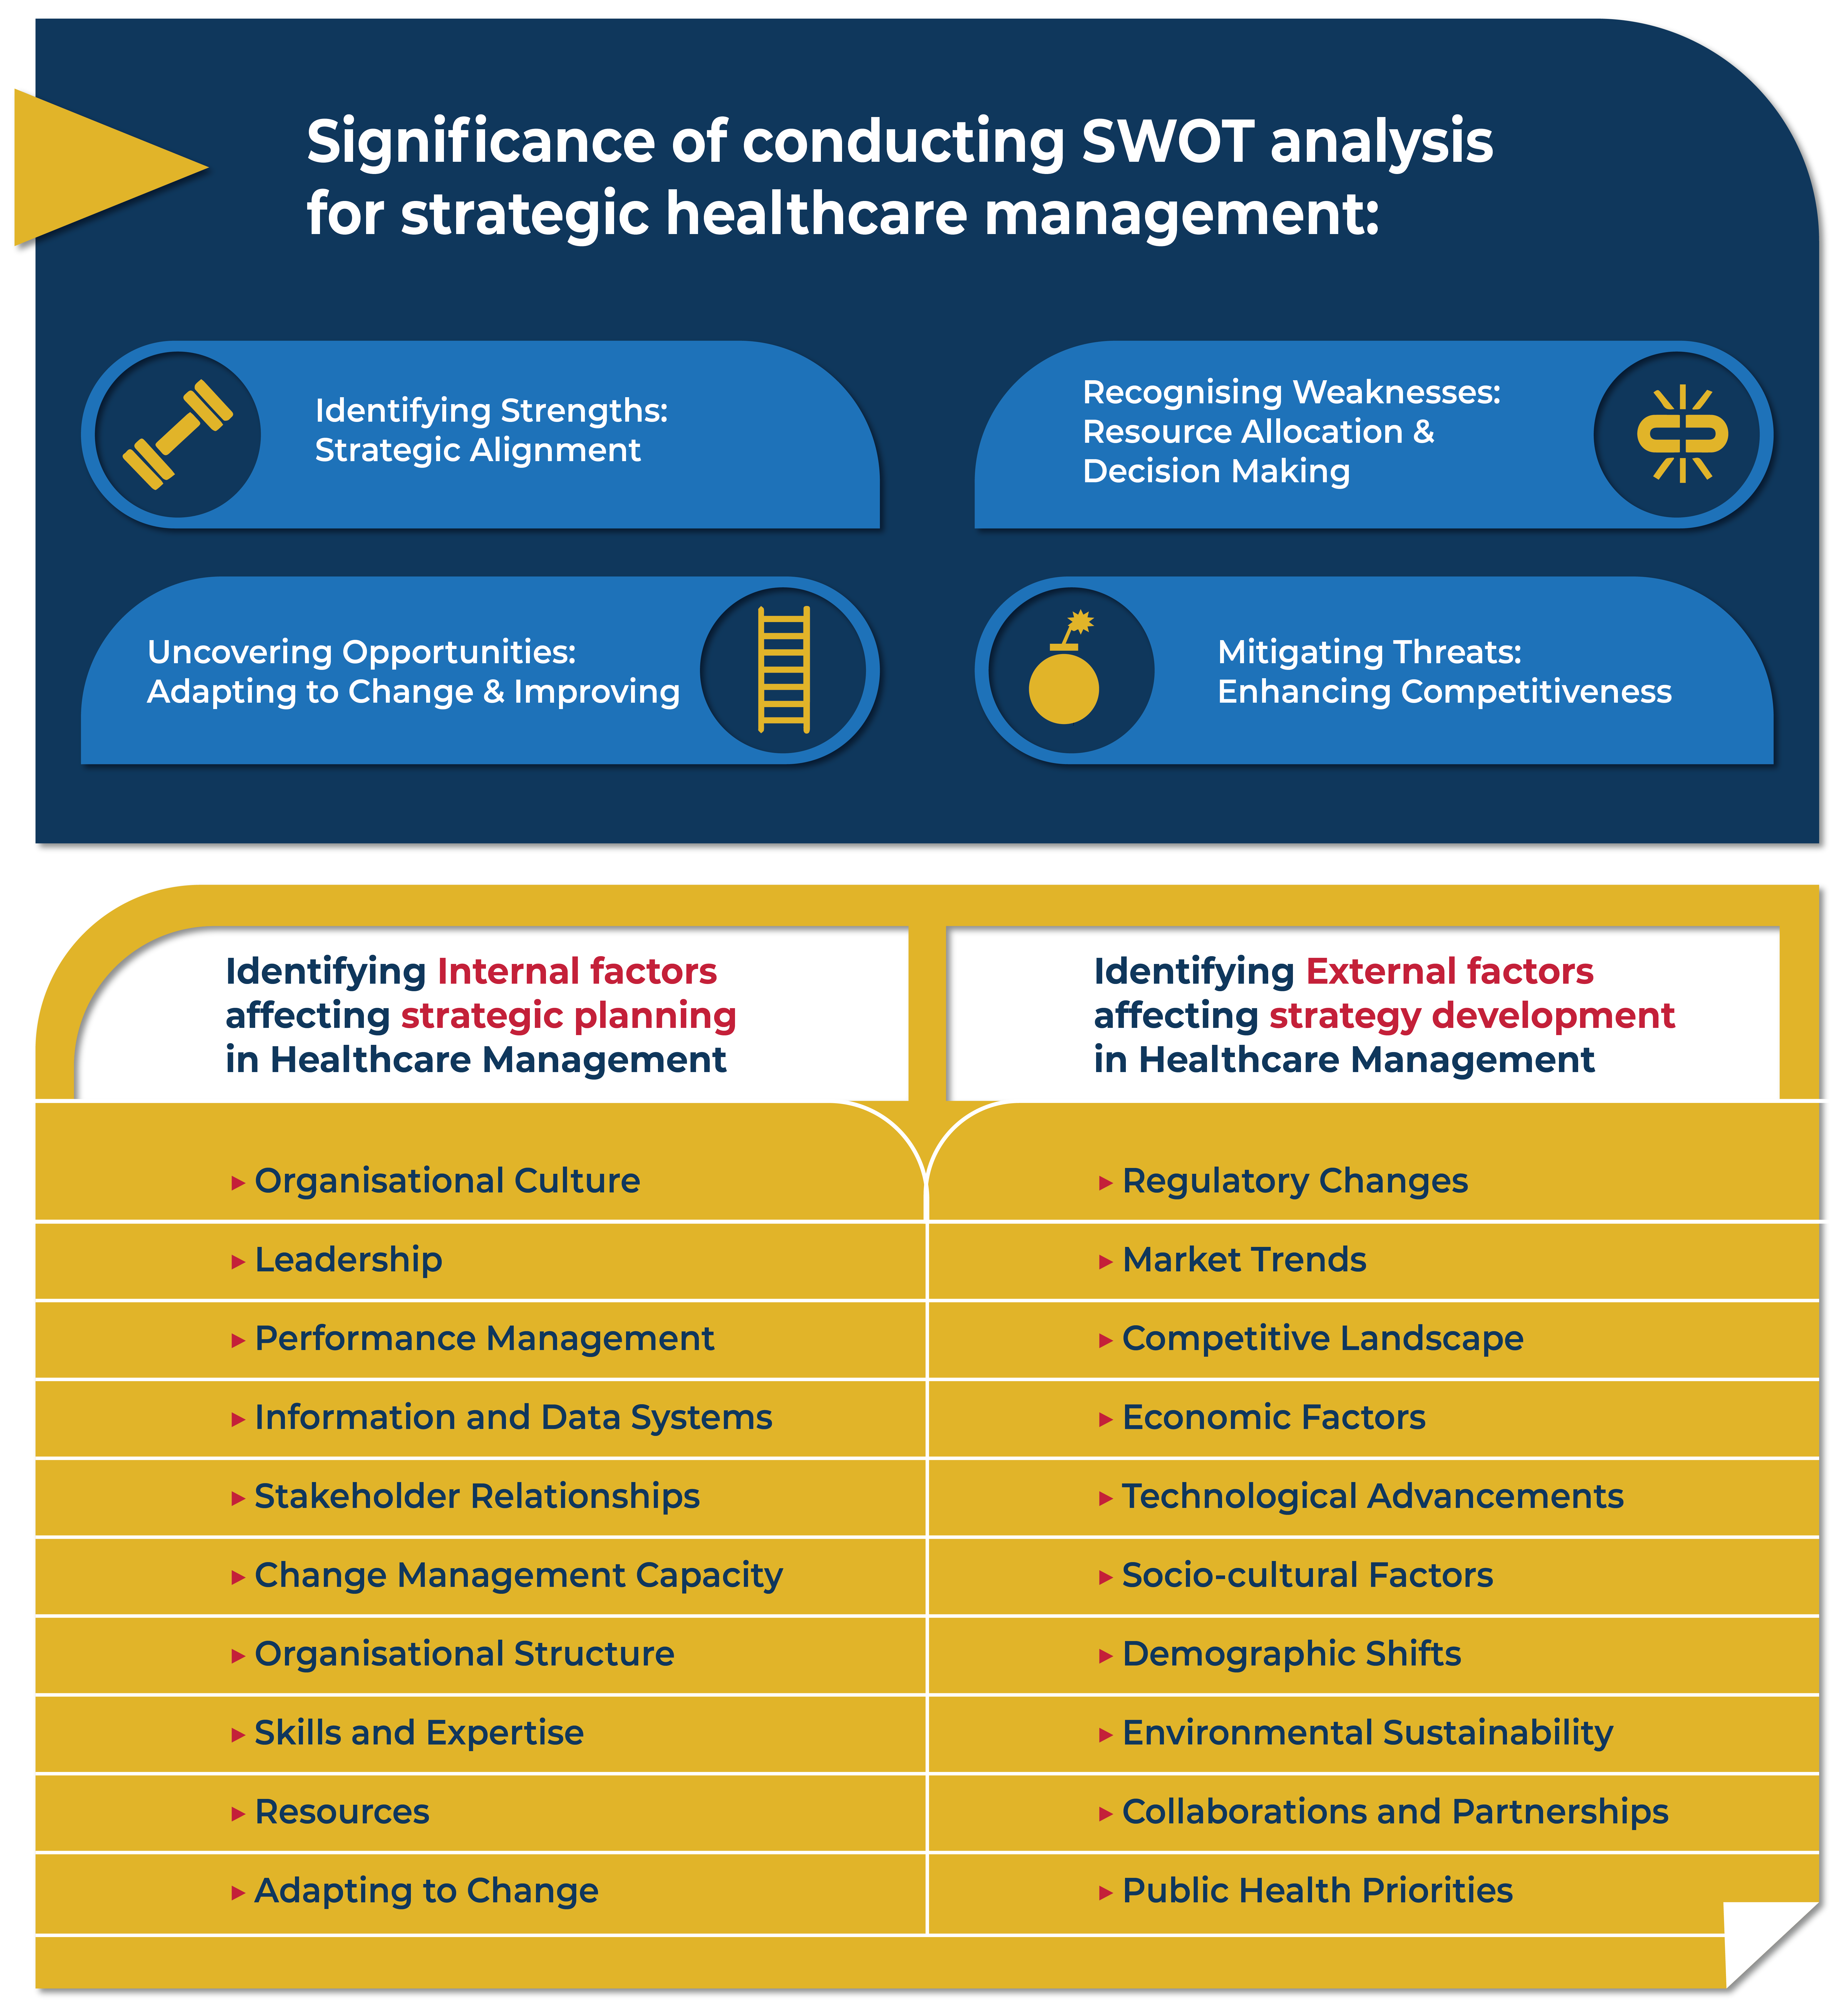 SWOT analysis for strategic healthcare management